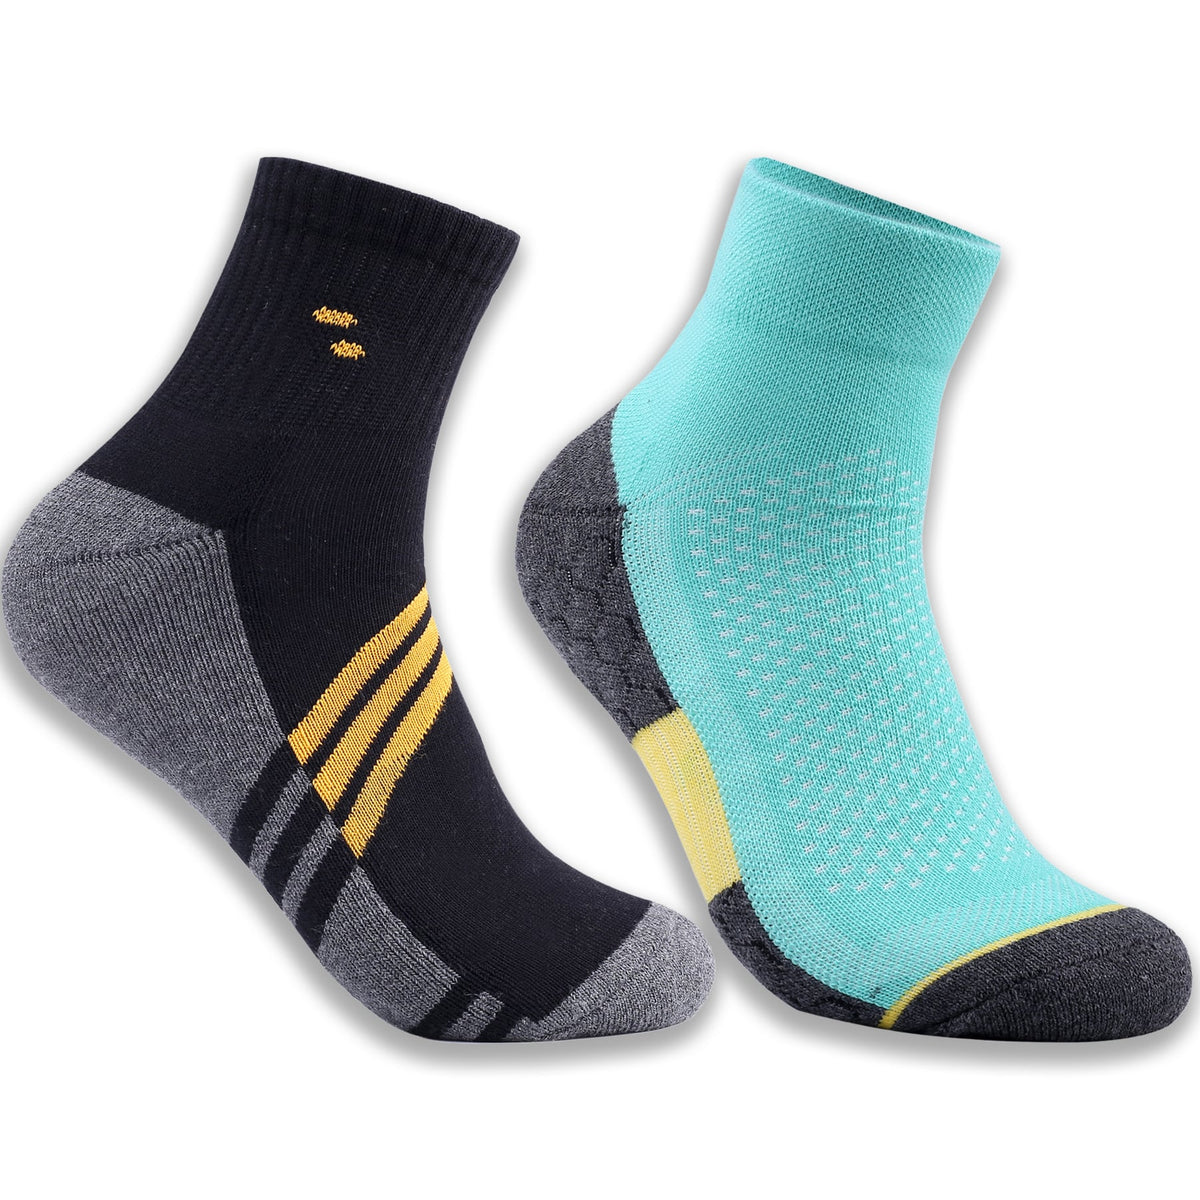 Combo of a 2 pair Sports Terry Socks